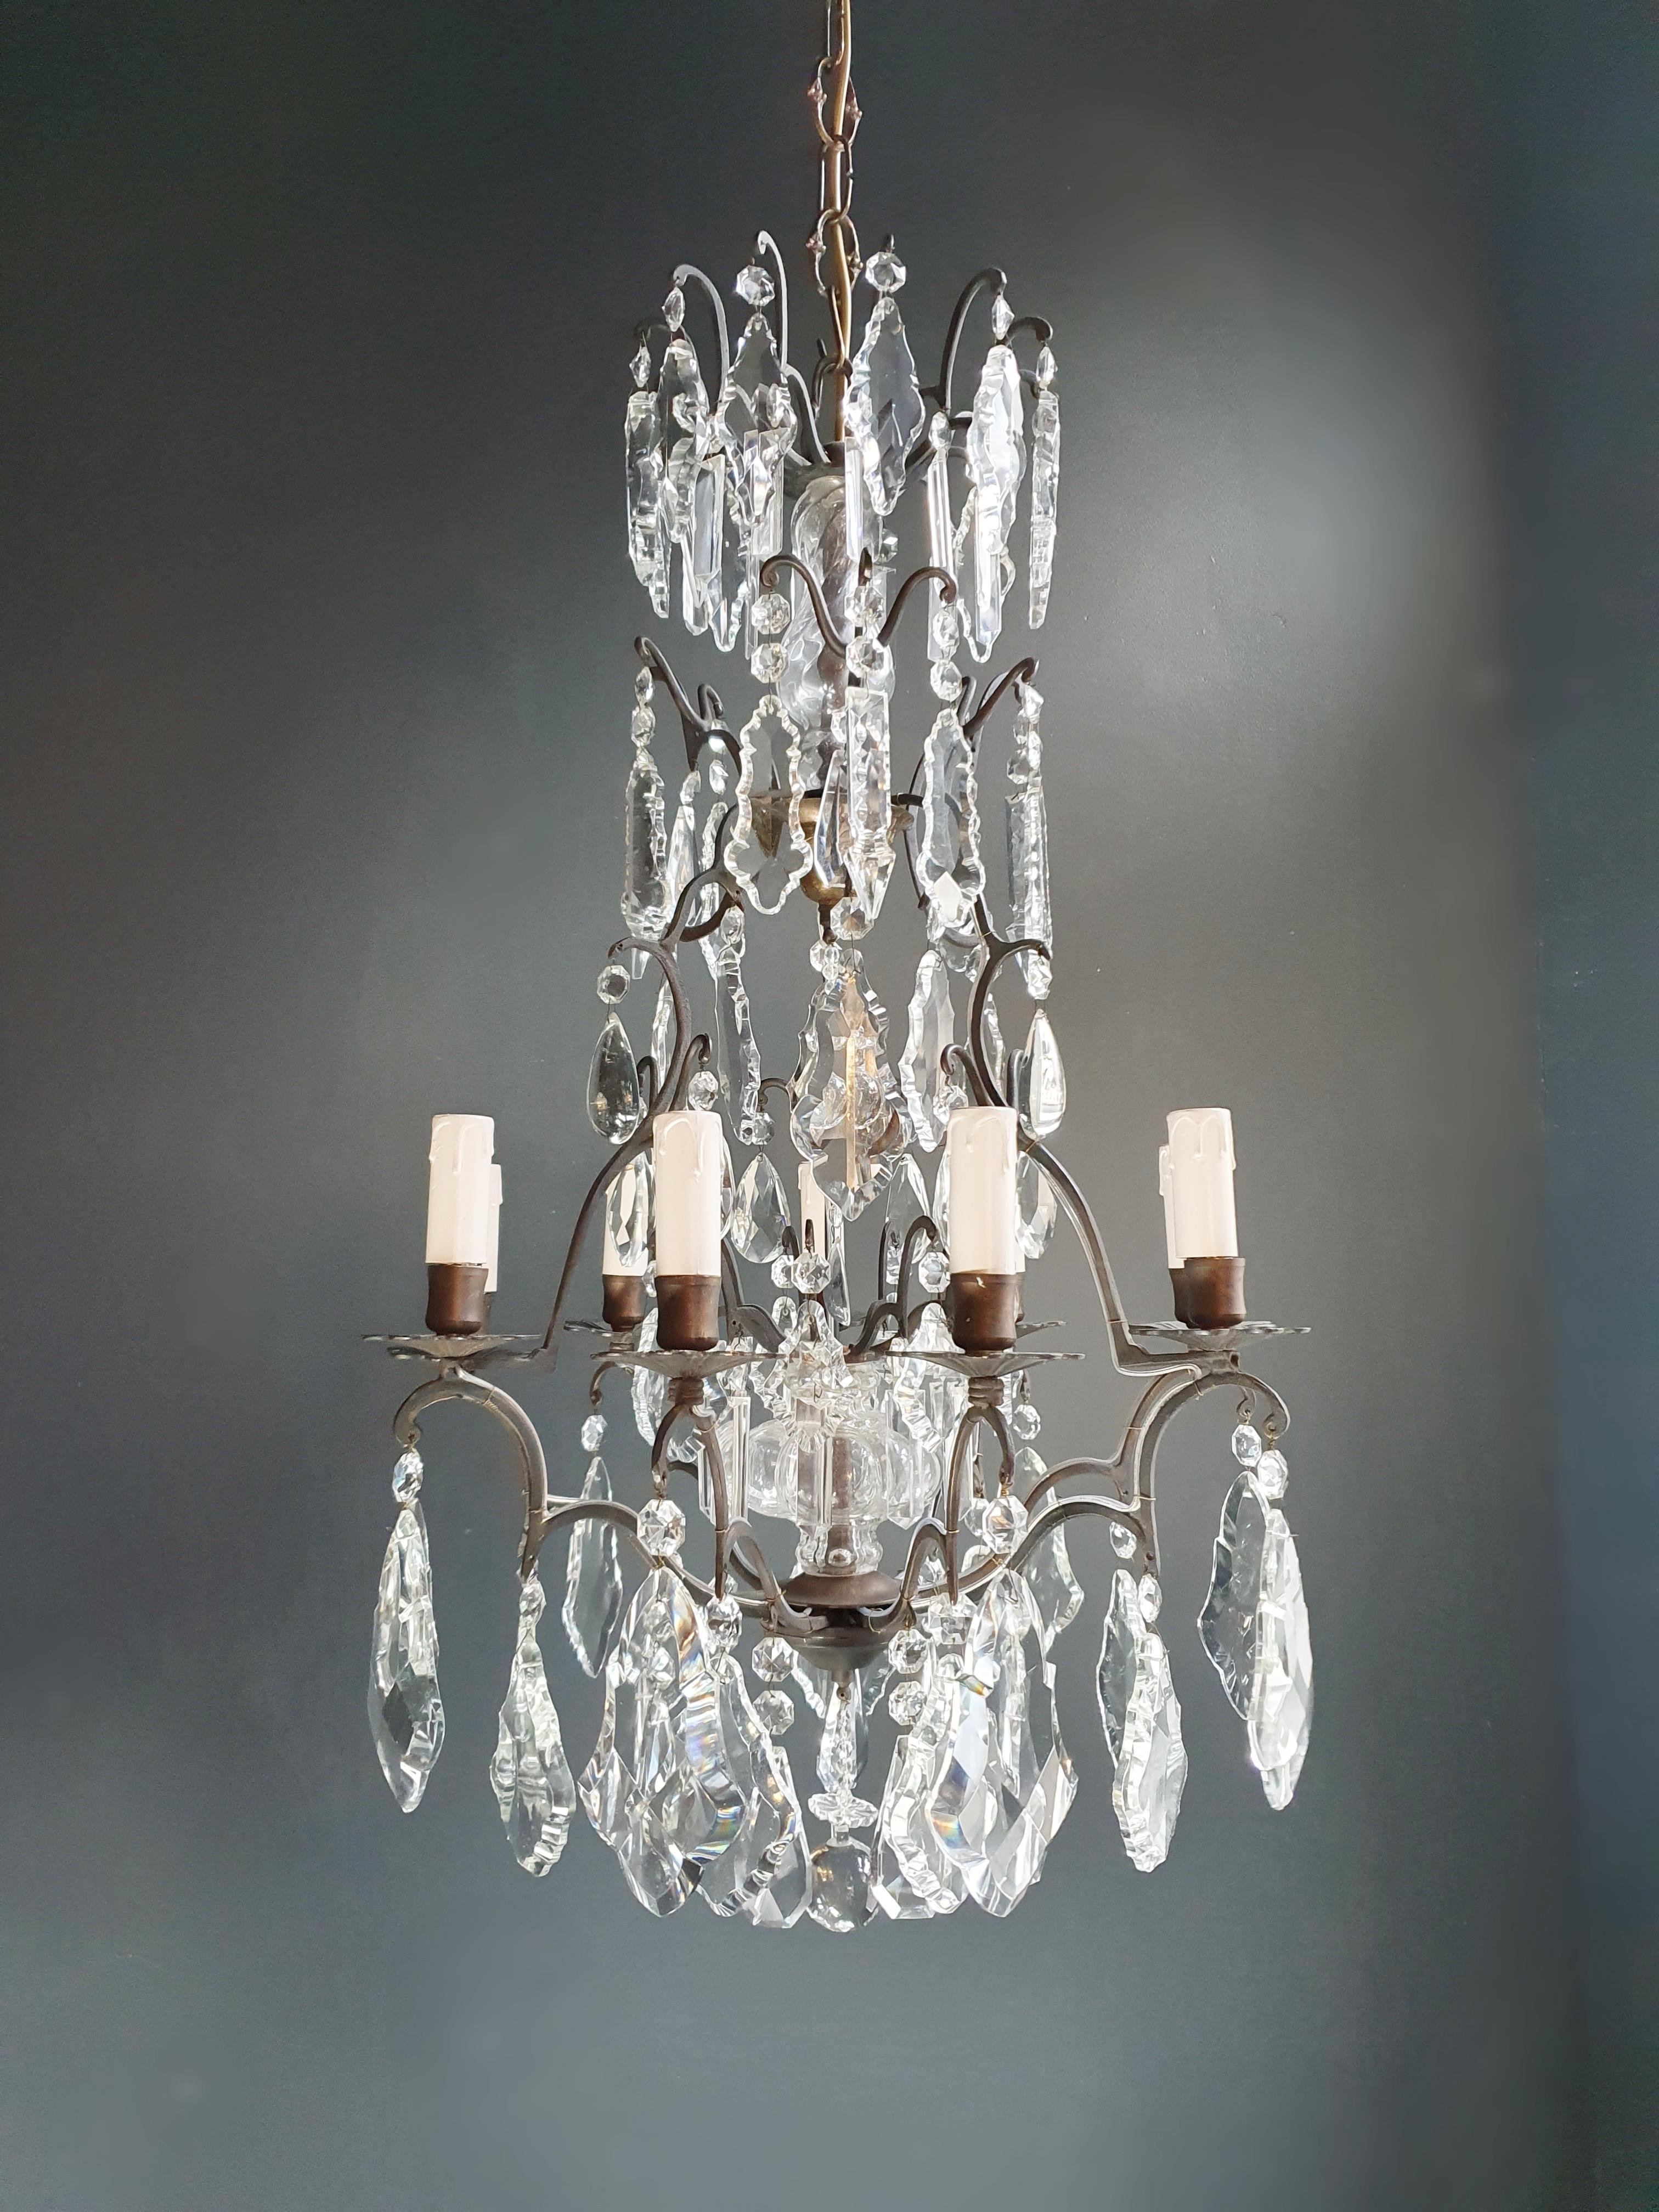 **Restored Vintage Chandelier - Preserving History with Care in Berlin**

This vintage chandelier has been thoughtfully restored in Berlin, capturing the essence of its historical charm. Its electrical wiring has been expertly adapted for use in the